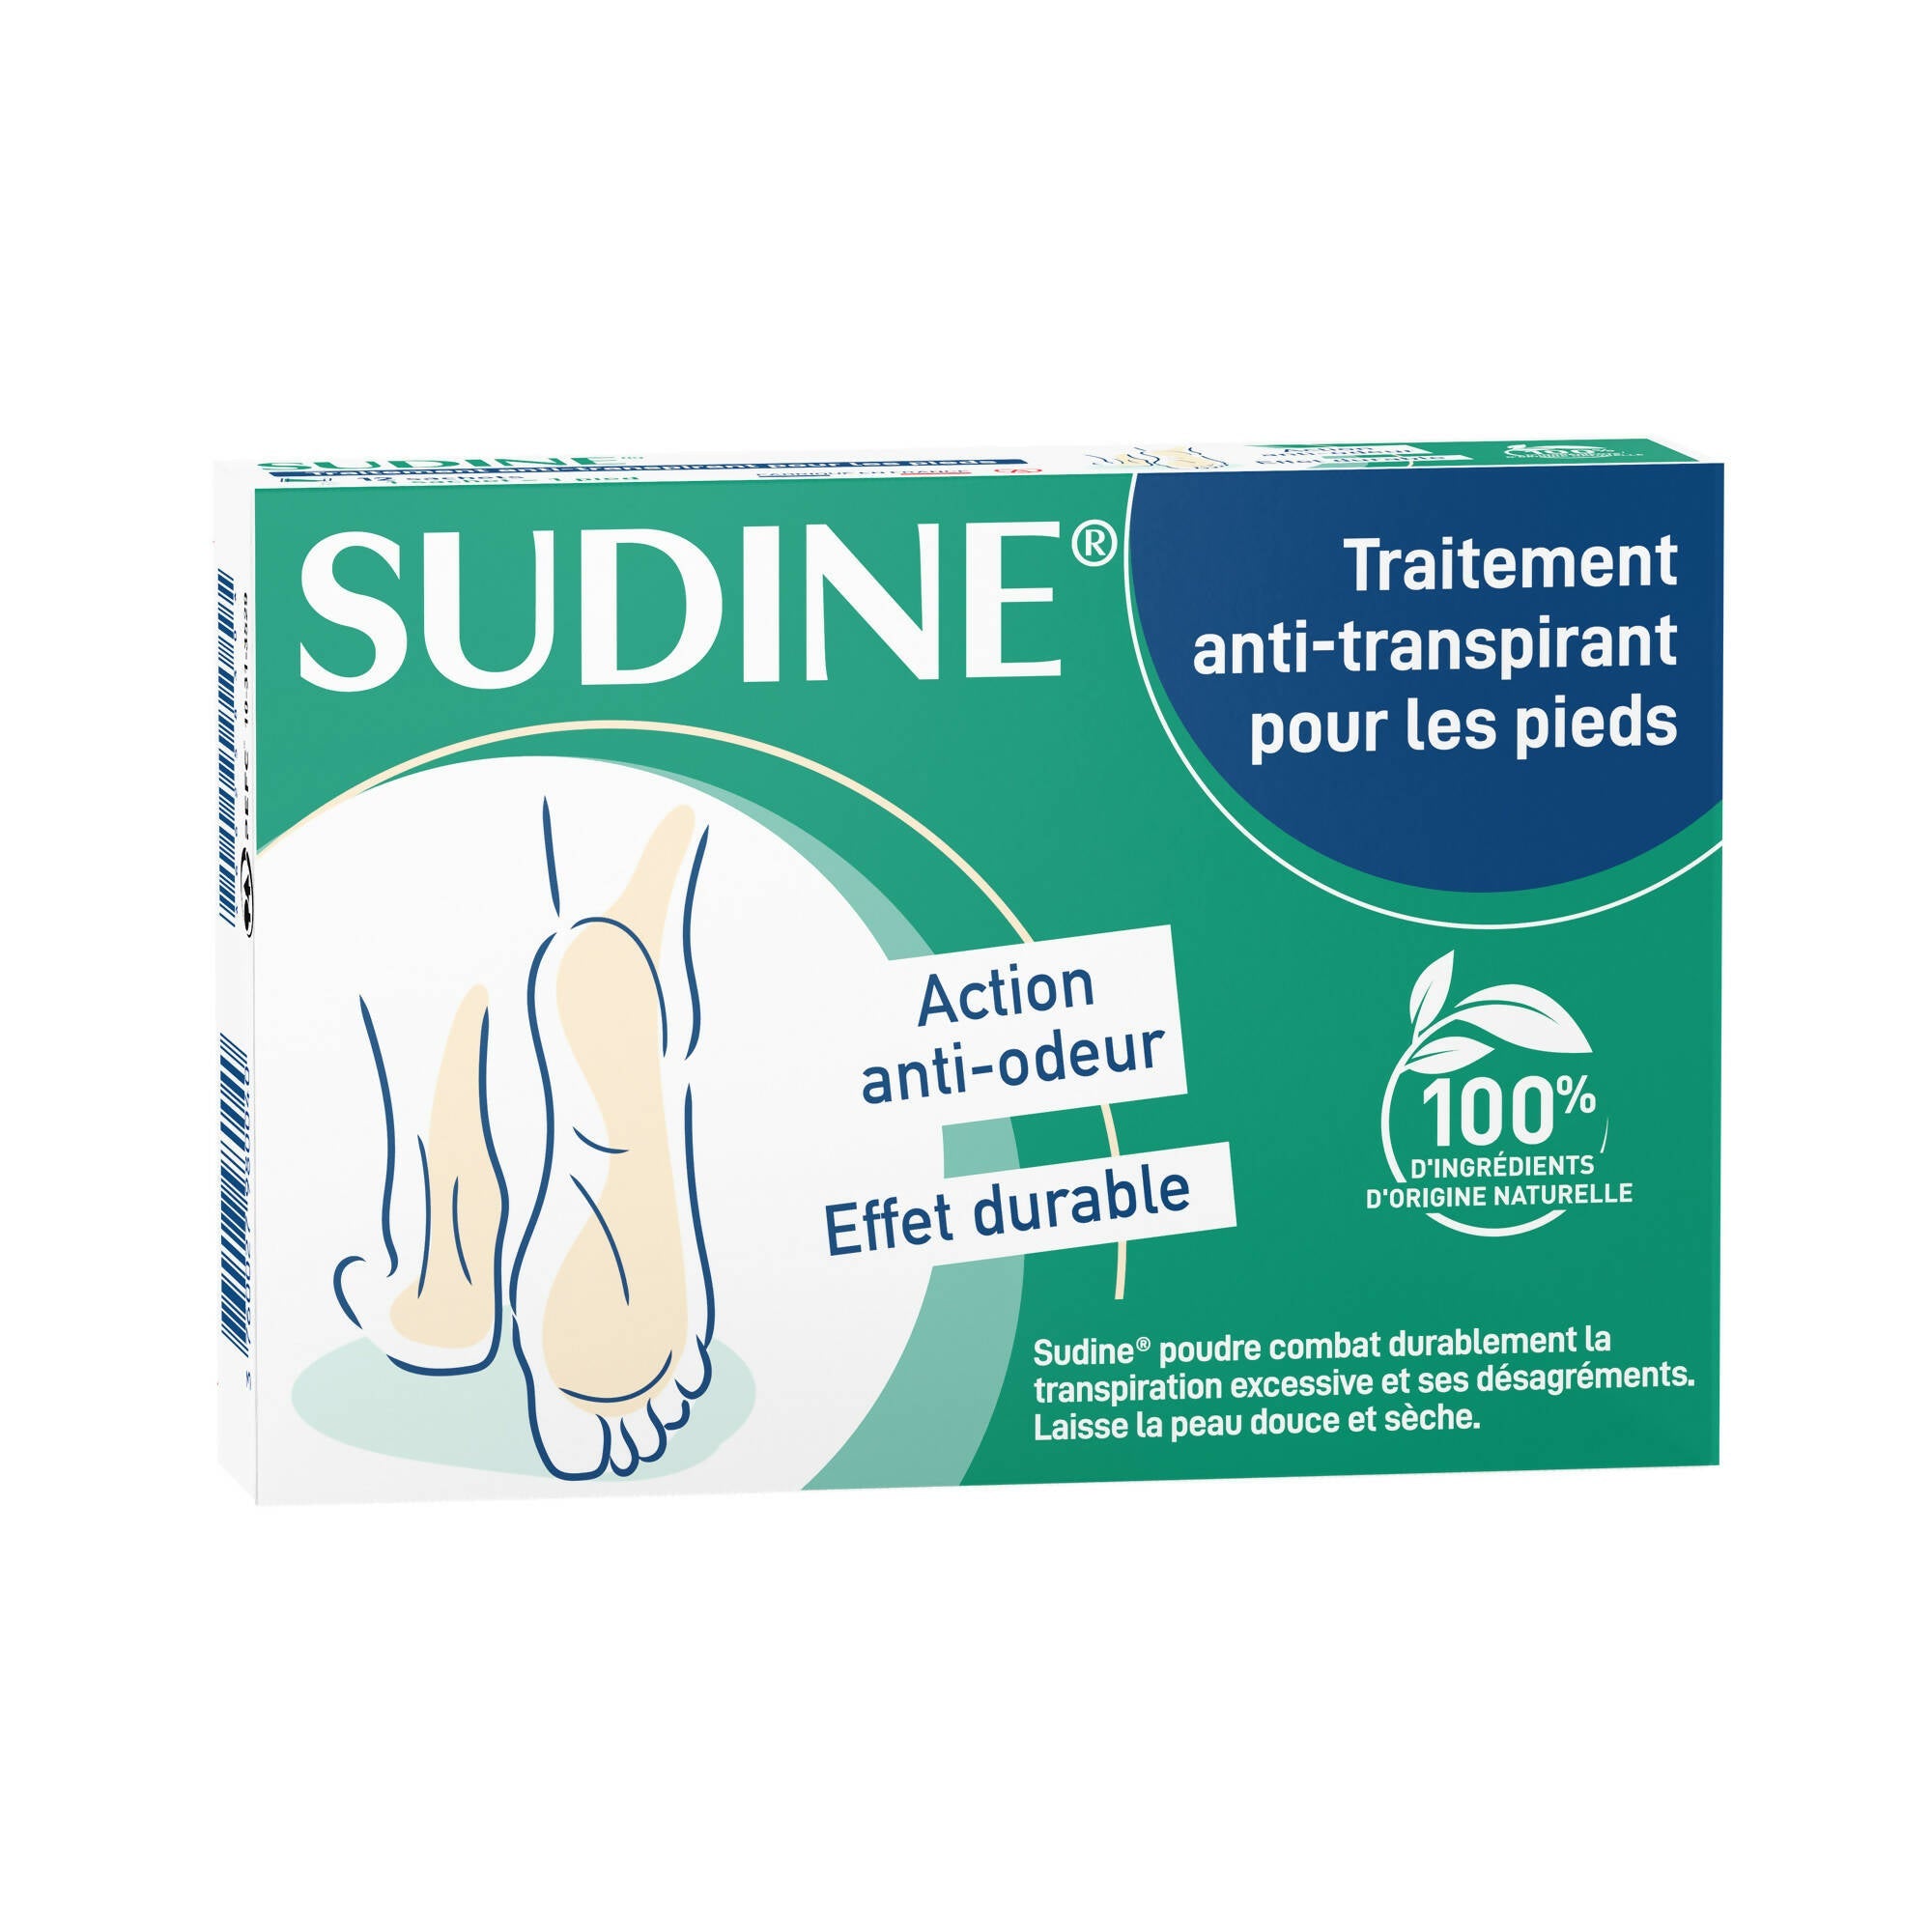 SORIFA - Set of 3 - Sudine Powder Antiperspirant Treatment - Foot - Regulates perspiration - Absorbs - Prevents fungal infections - Without aluminum salts - Made in France - Box of 6 double sachets